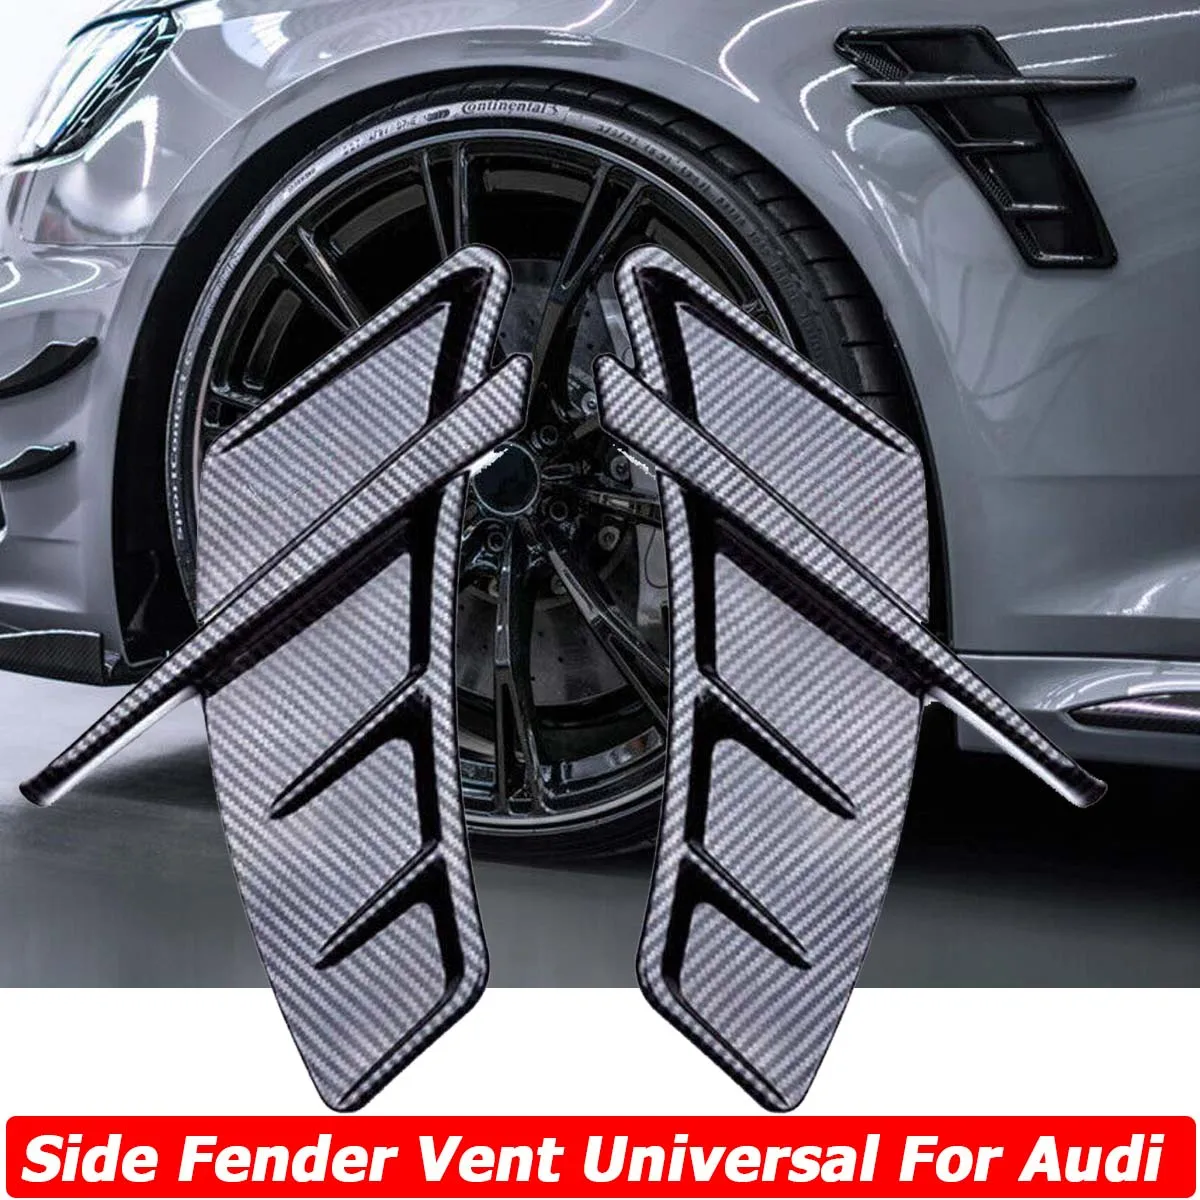 

Car Sticker Side Air Fender Vents Cover For Audi A6 S6 C6 C5 A3 S3 8V 8P A4 S4 B8 B6 B7 B9 Q5 A5 S5 Q3 Q7 Q2 Auto Accessories